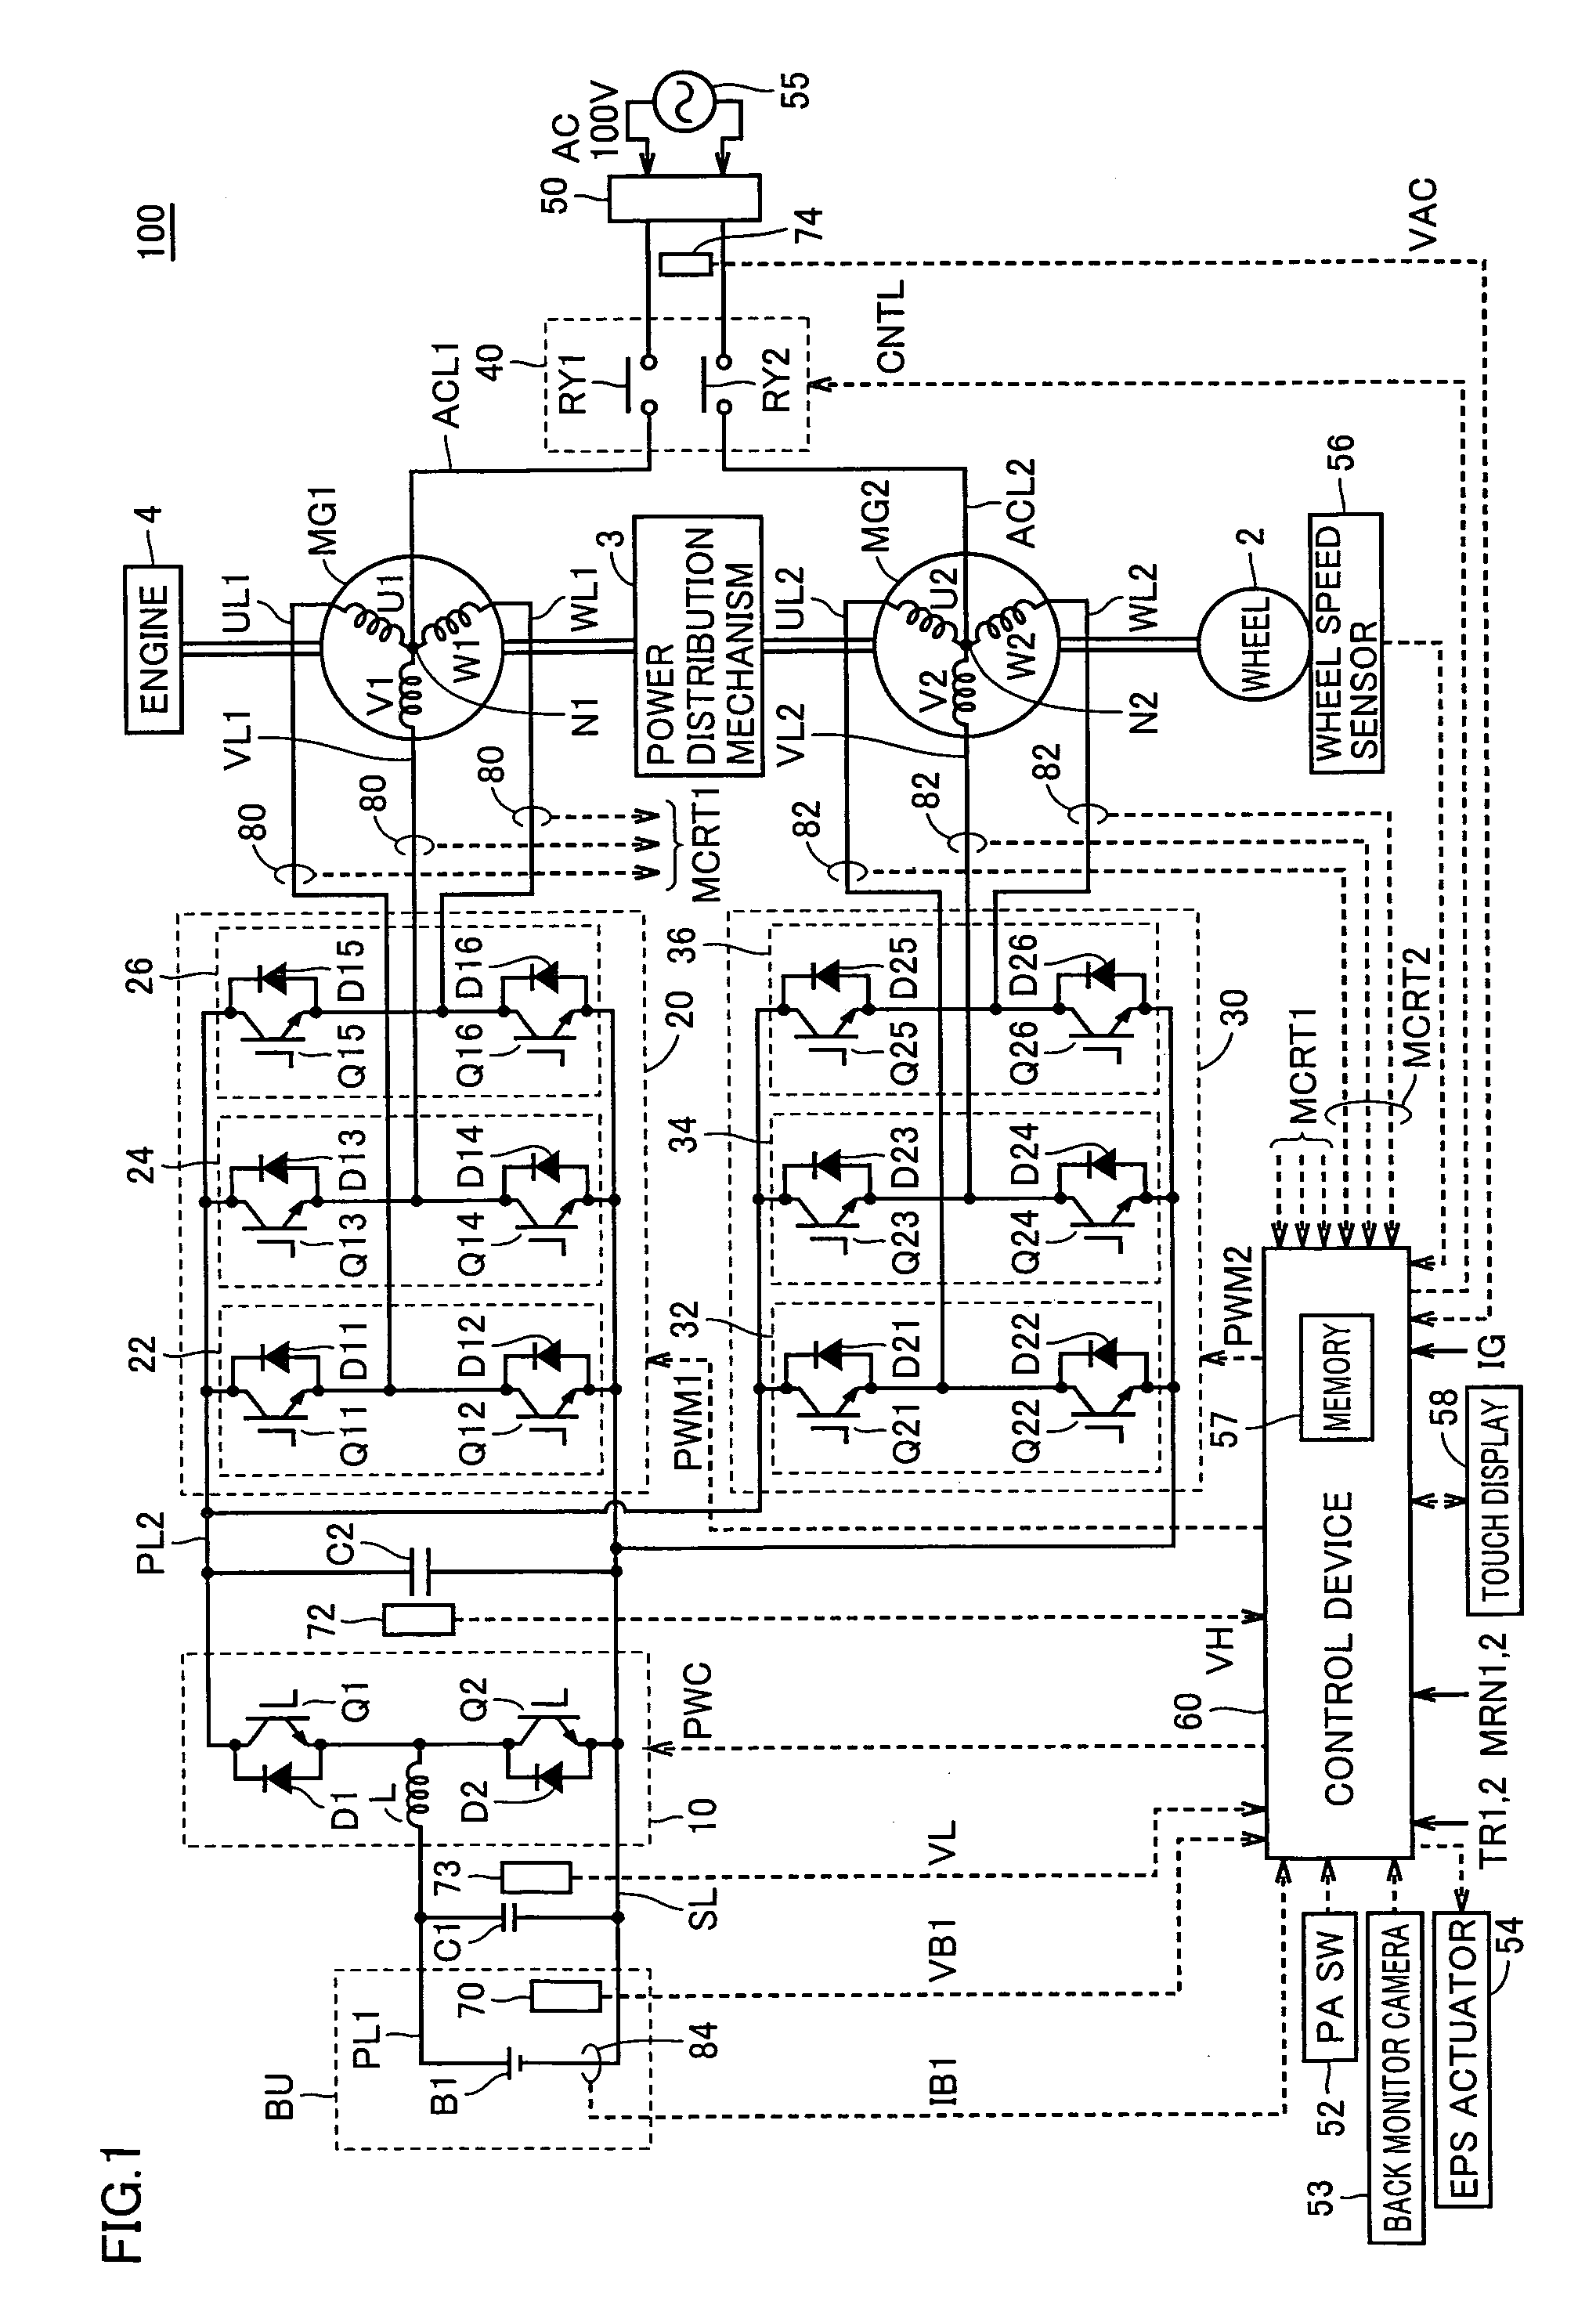 Parking assist device and a method for electric power transmission and reception between a vehicle and a ground apparatus